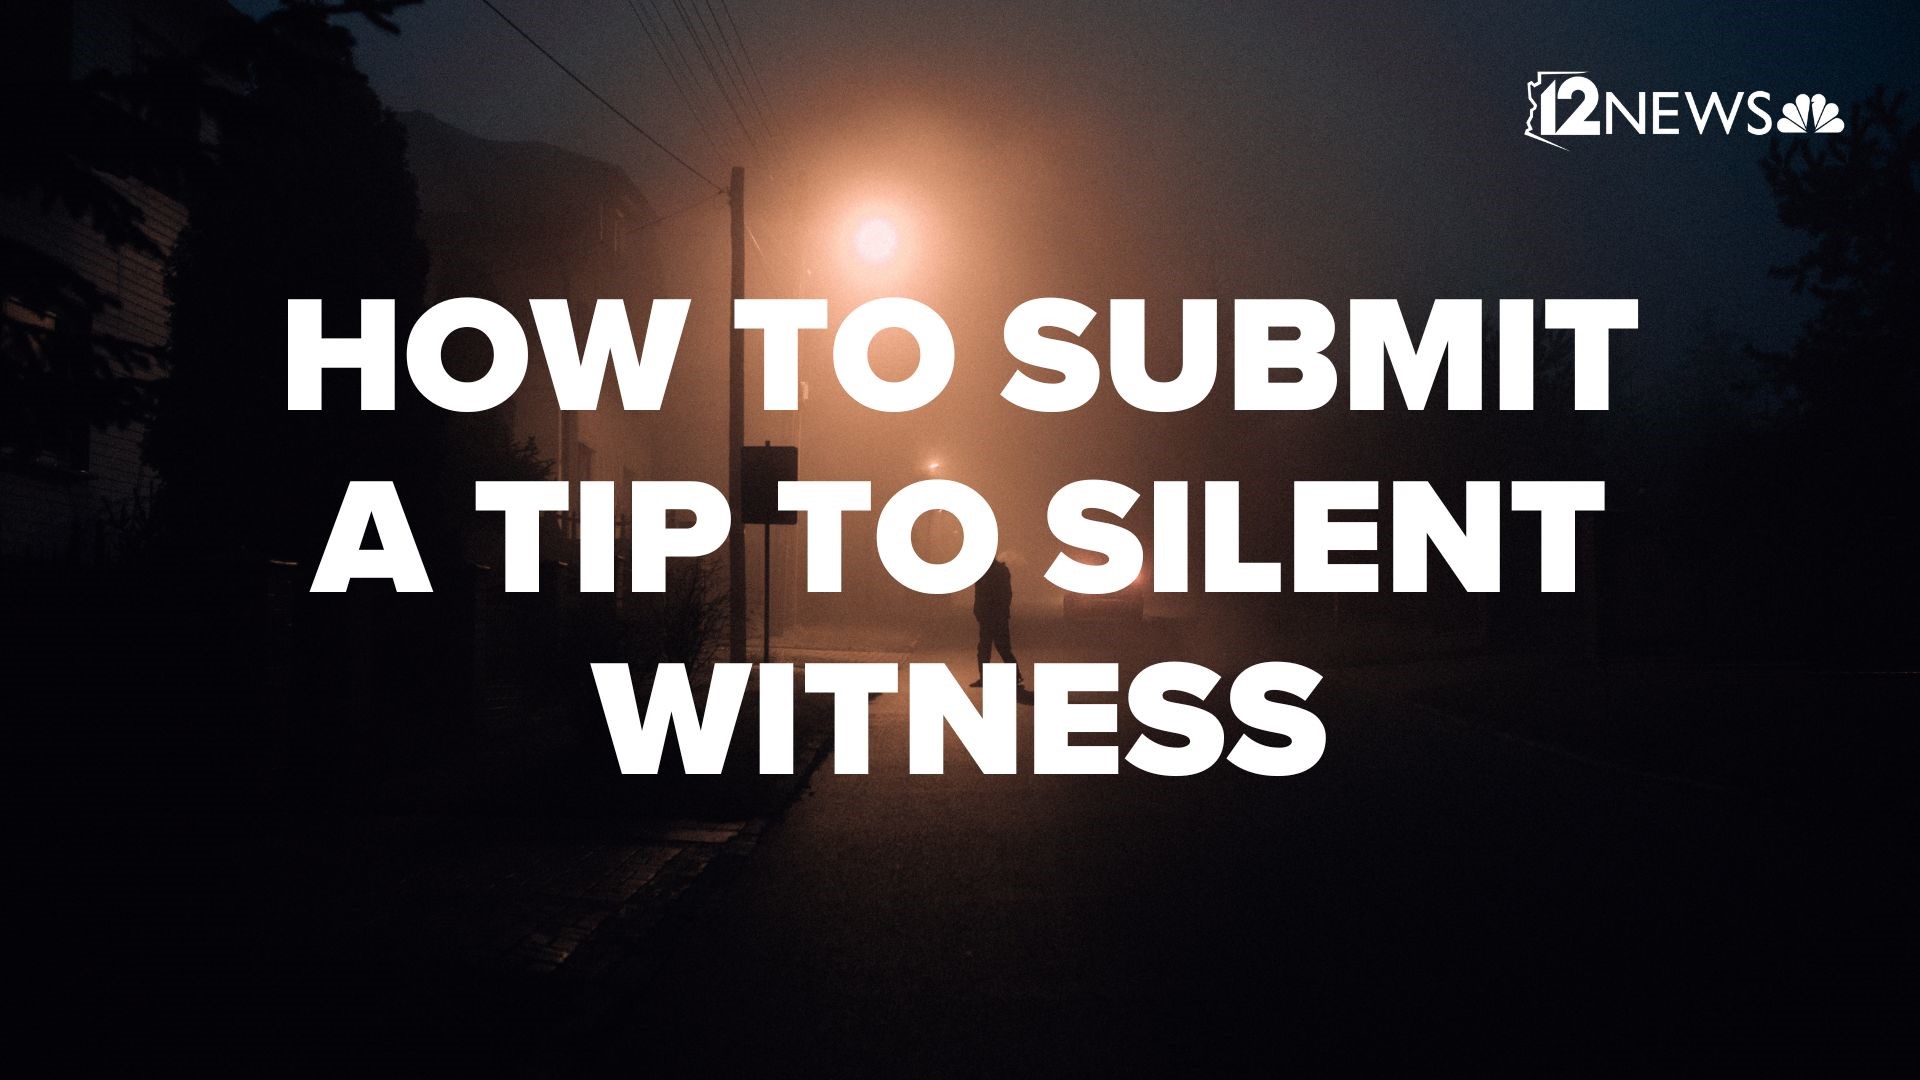 If you have information about a local crime, here are some ways to submit a tip to the Silent Witness program